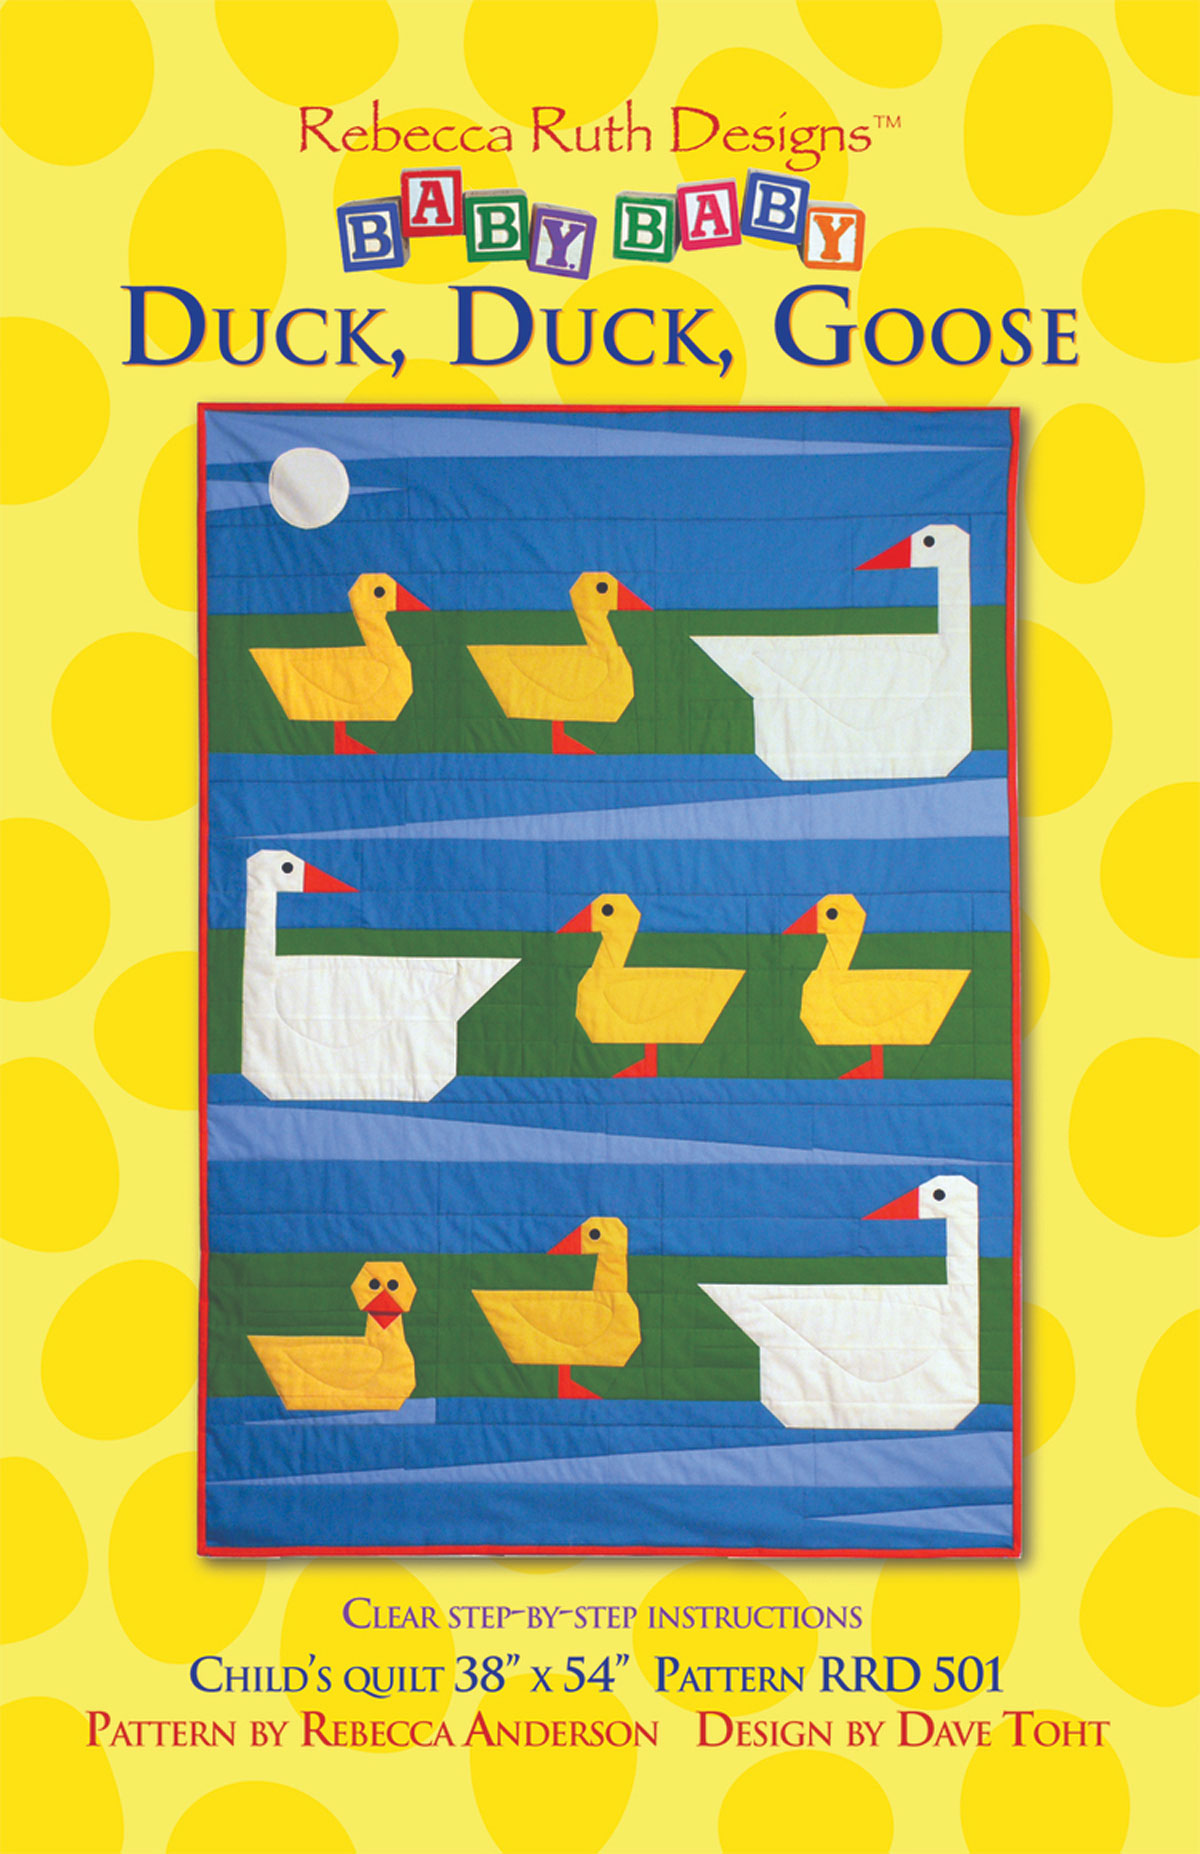 Duck-Duck-Goose-quilt-sewing-pattern-rebecca-ruth-designs-front